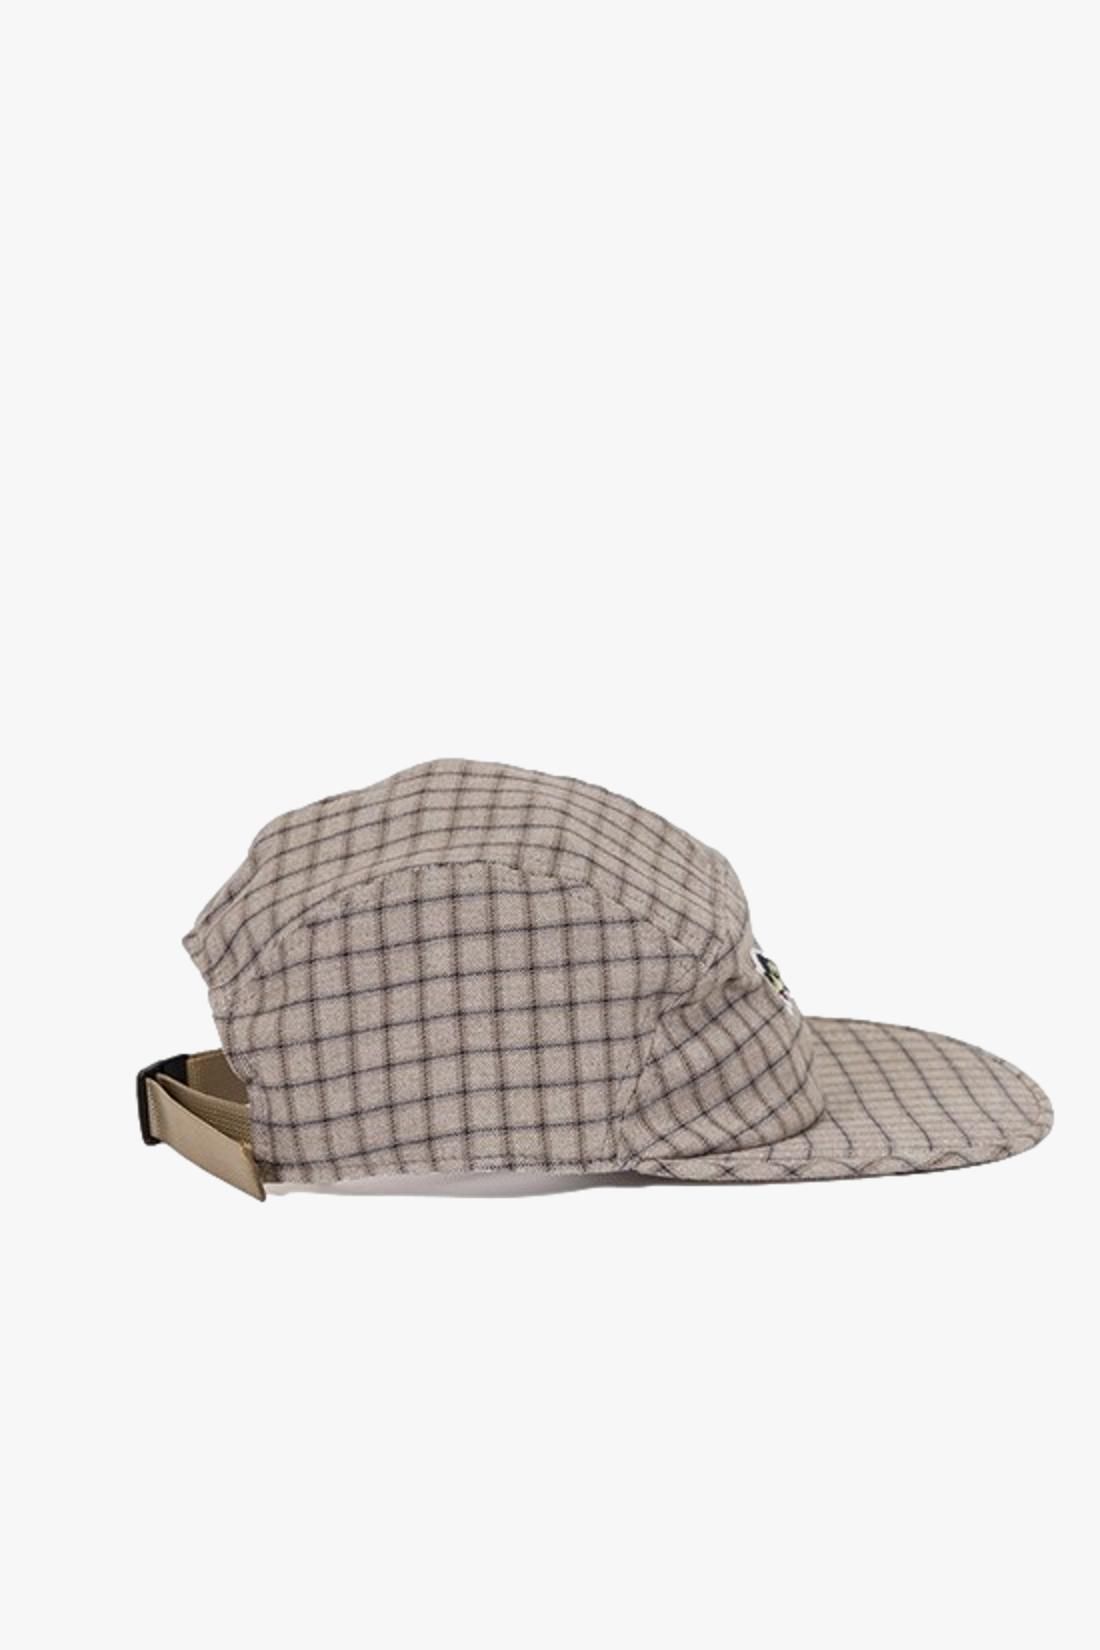 STAY HUNGRY SPORTS / Aborre camp cap flannel Check